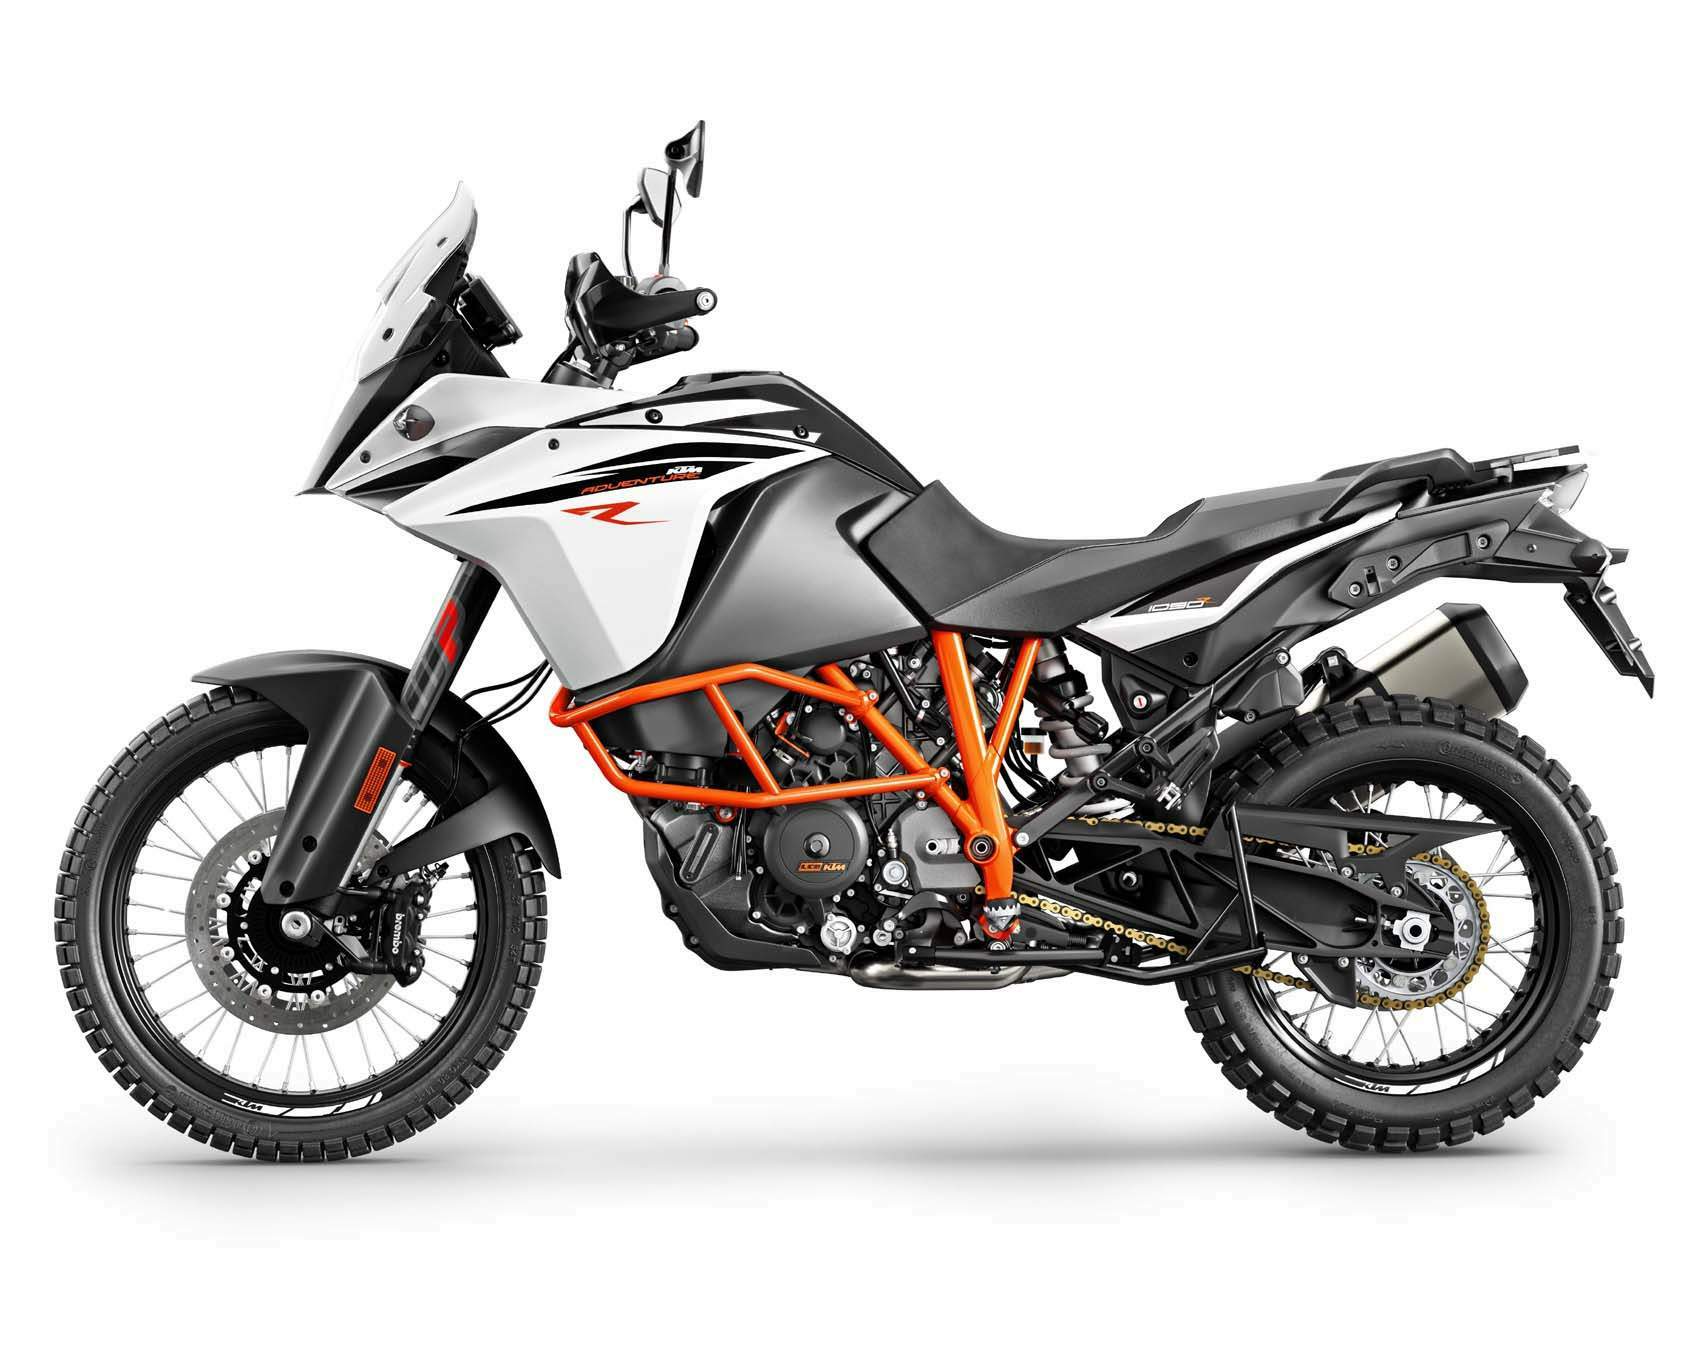 KTM 1090 Adventure R technical specifications